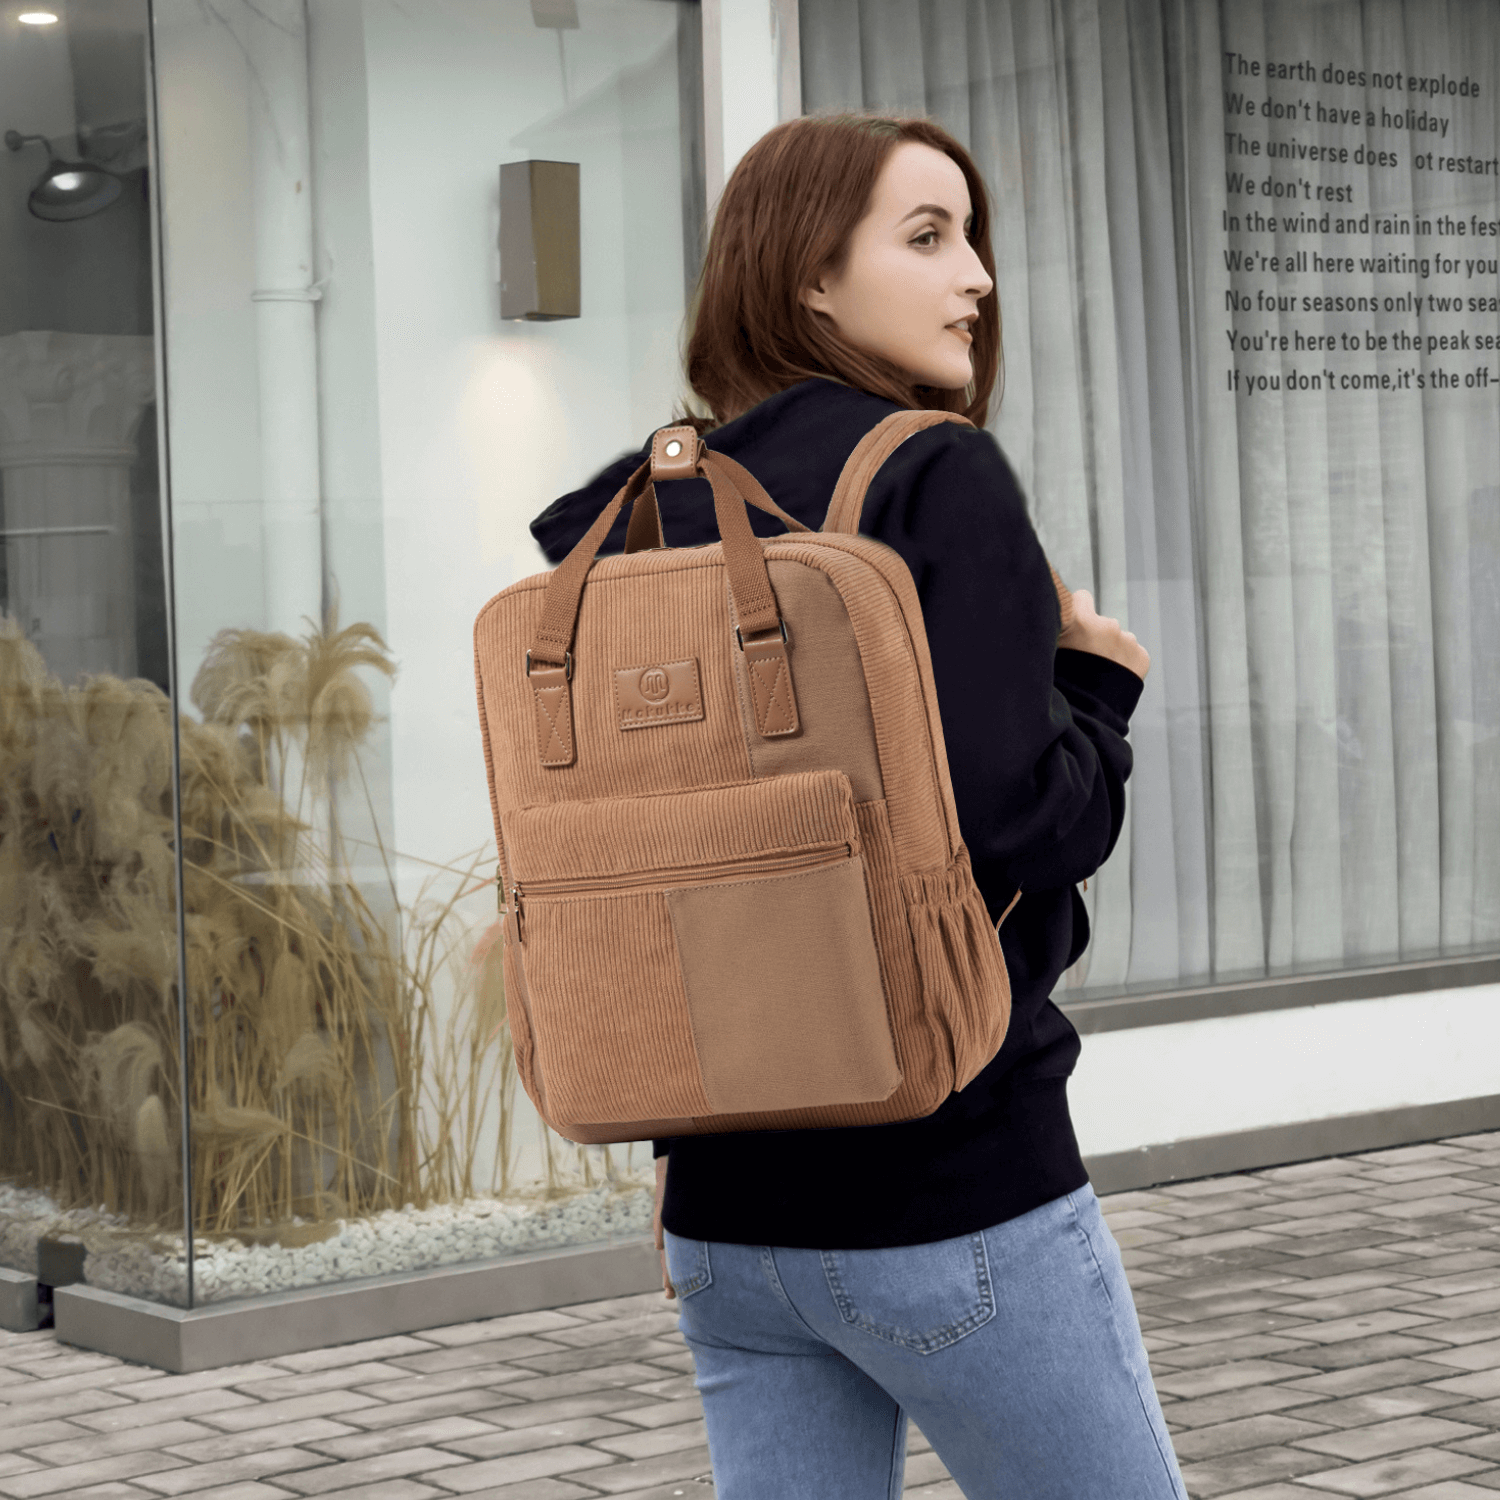 Corduroy Shopper Bag Large Capacity For Shopping School Bag, Stylish Tote  Handbag Vintage Casual Tote Bags For Daily Life, Crossbody Bag College